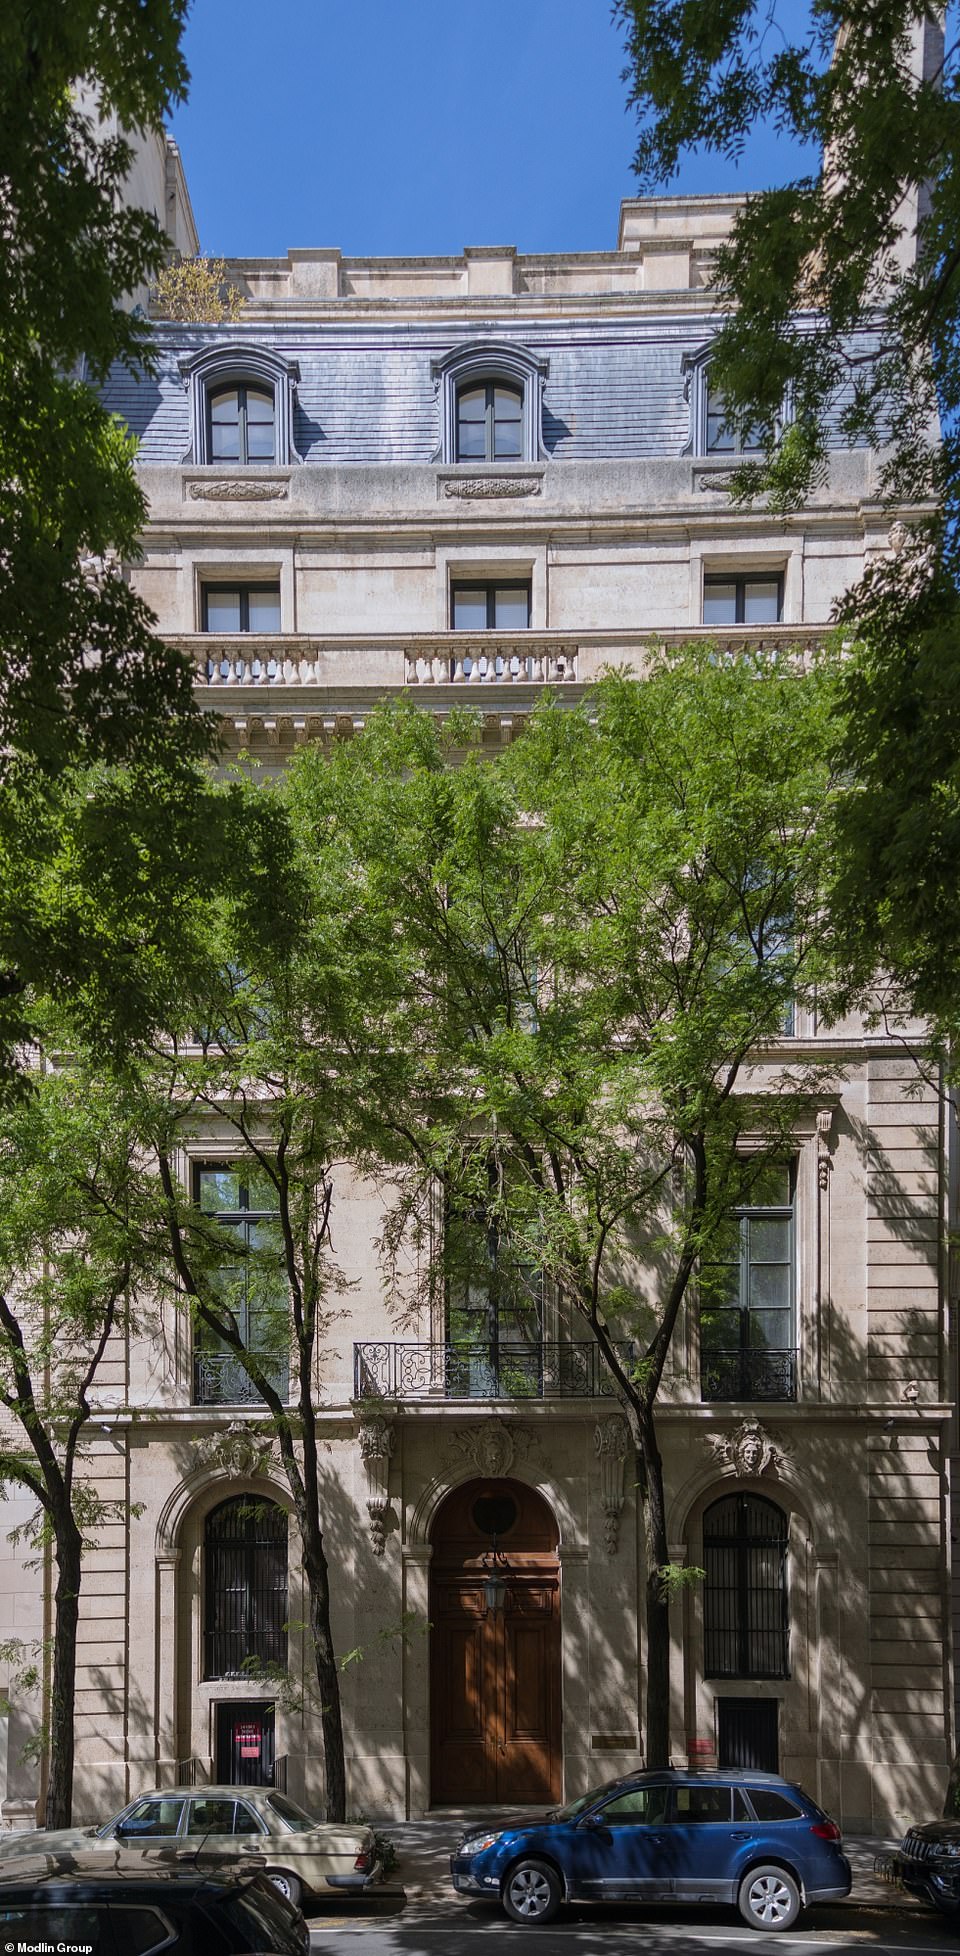 The sprawling East 71st home is now listed for $65 million, a decrease of 26 percent since it was first listed in July